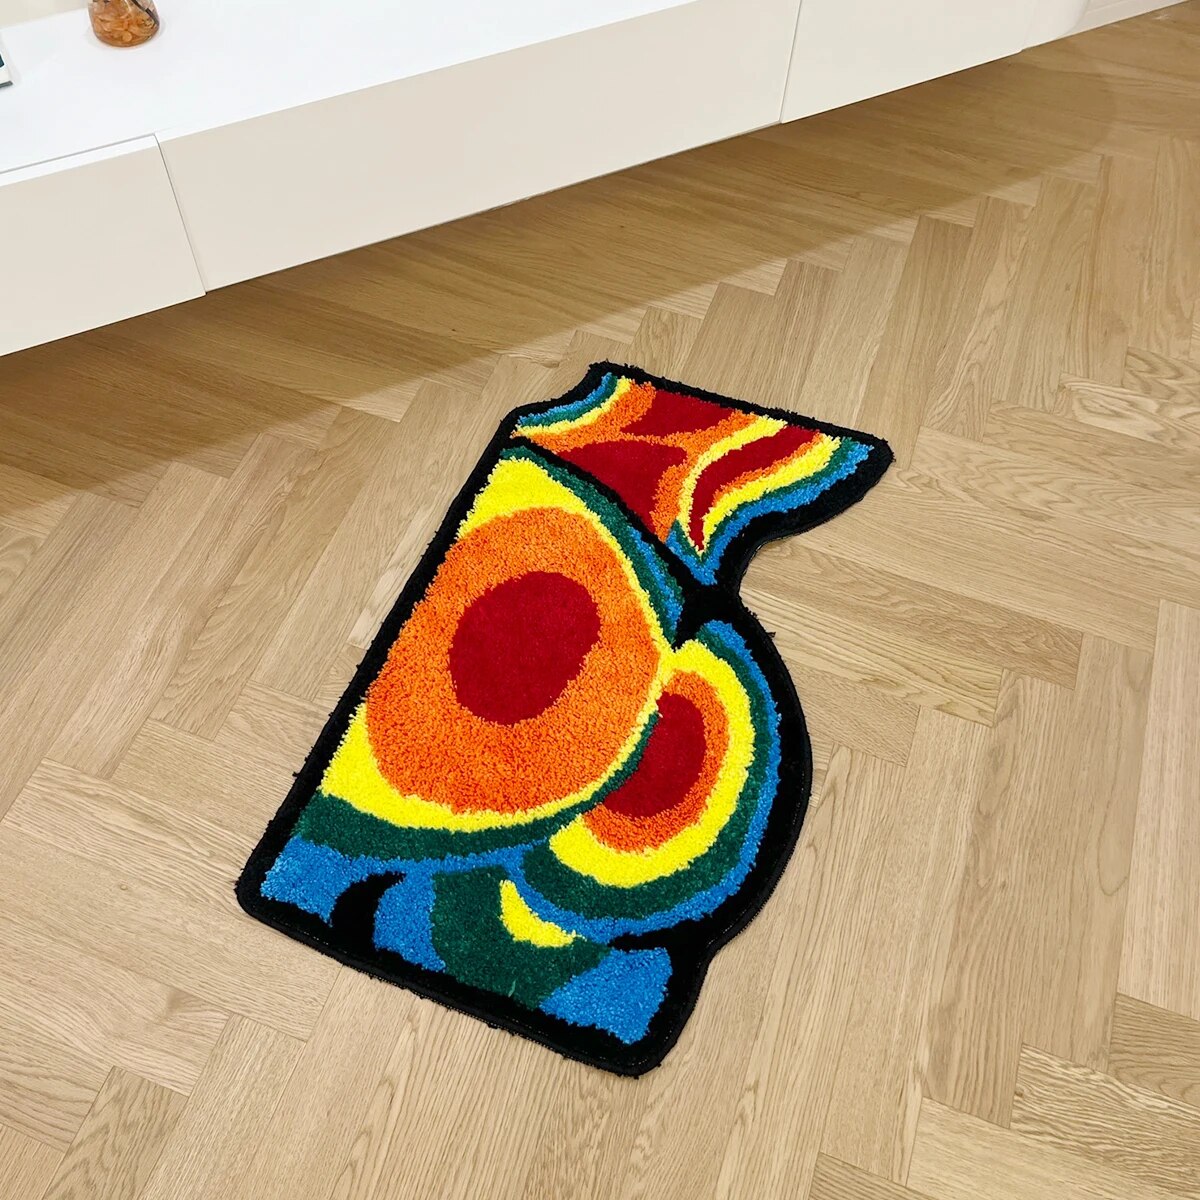 Sexy Woman Butt Infrared Colored Rug,